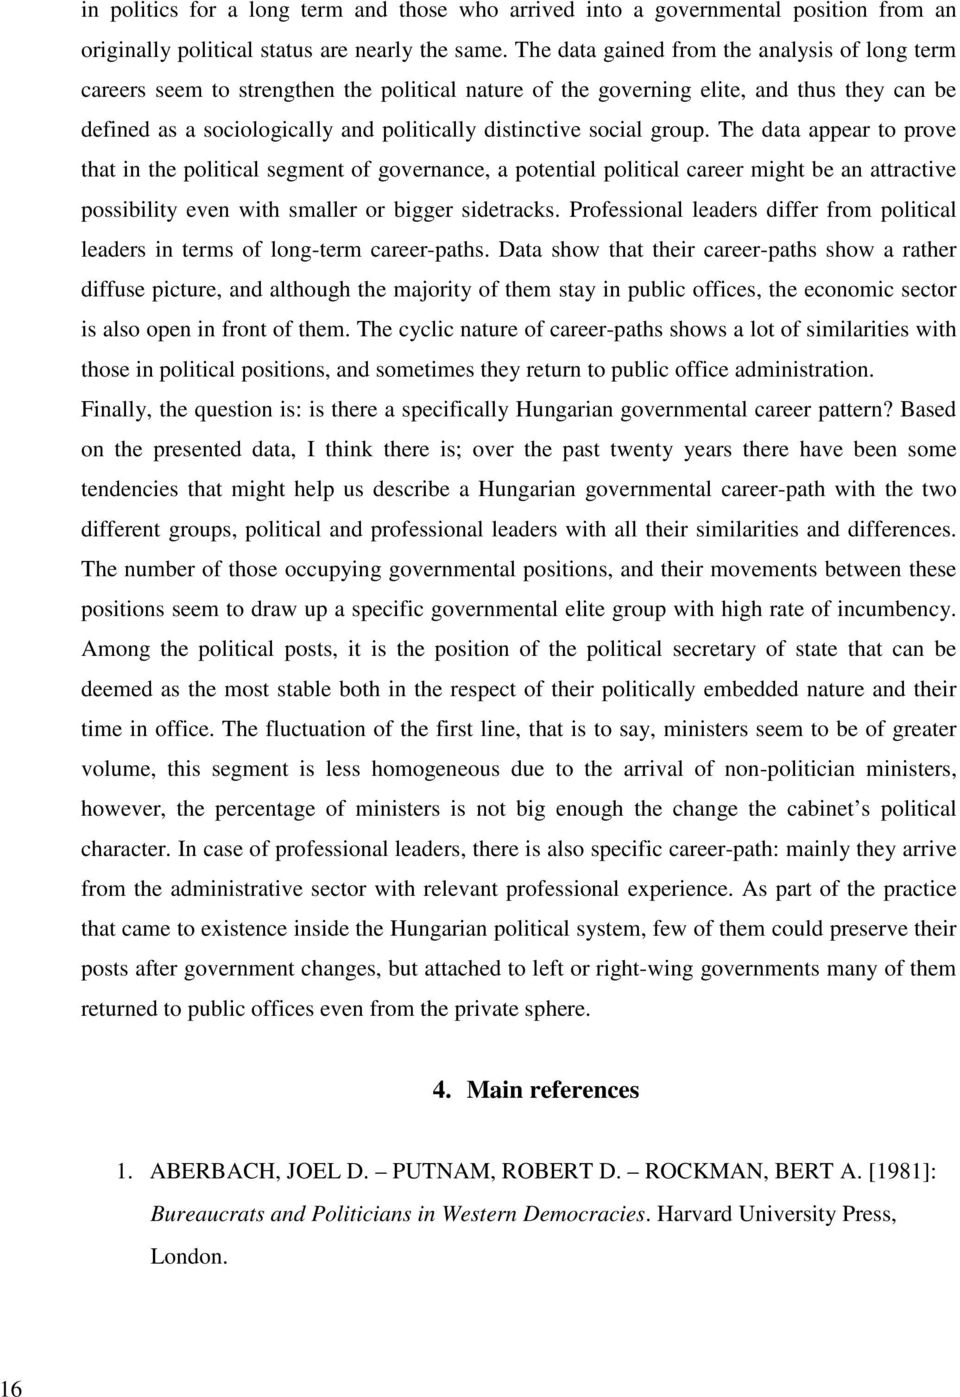 social group. The data appear to prove that in the political segment of governance, a potential political career might be an attractive possibility even with smaller or bigger sidetracks.